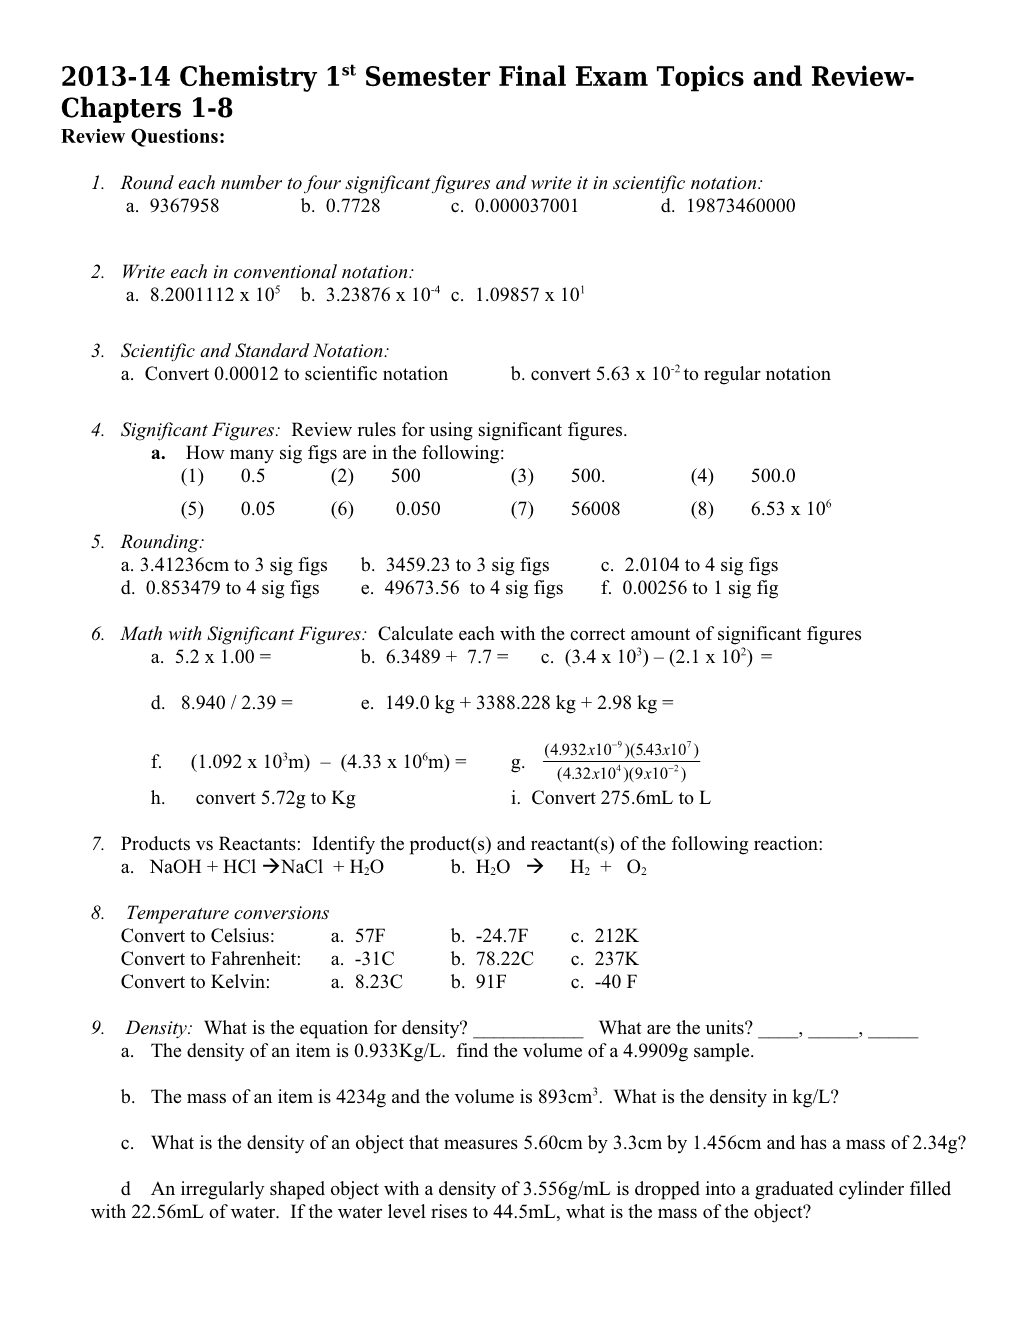 2009-10 Chemistry 1St Semester Final Exam Topics and Review- Chapters 1-7